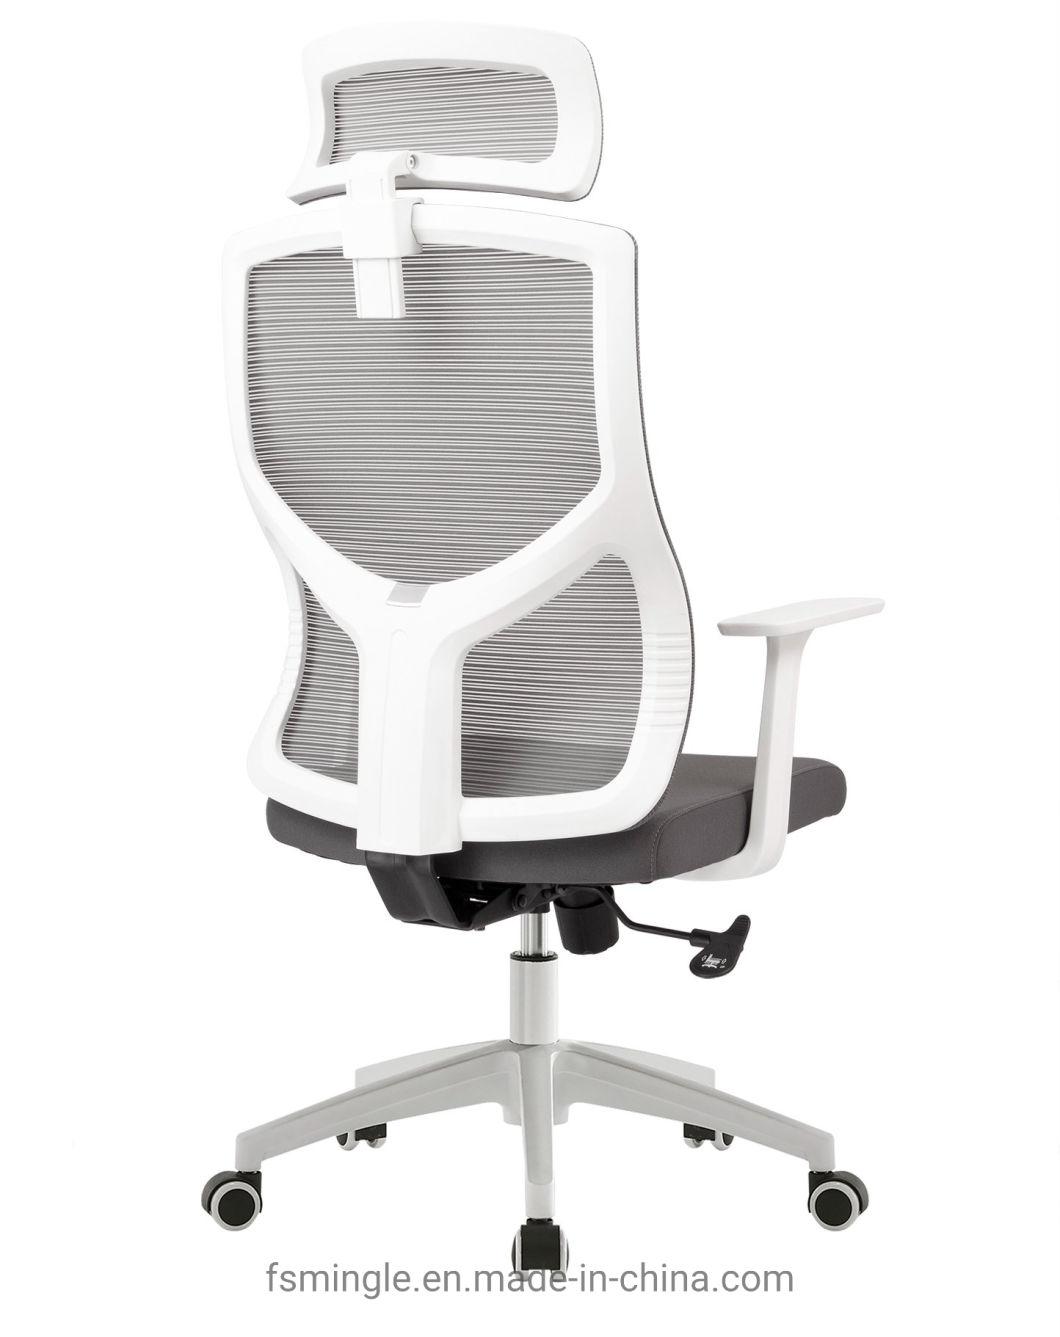 High Quality Modern Luxury Adjustable High Back Ergonomic Executive Office Chairs